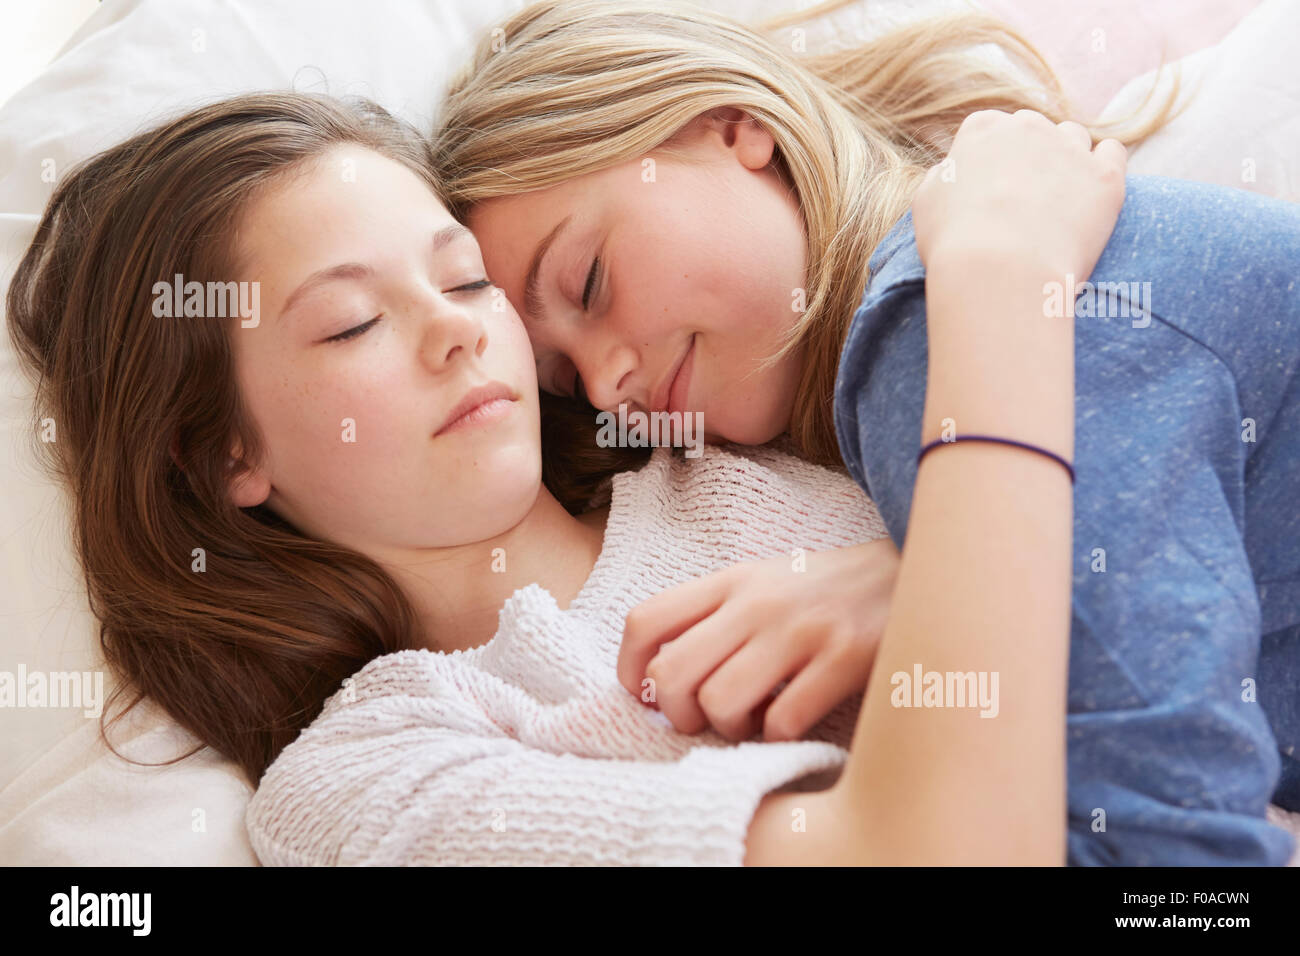 Two girls lying on bed with eyes closed Stock Photo